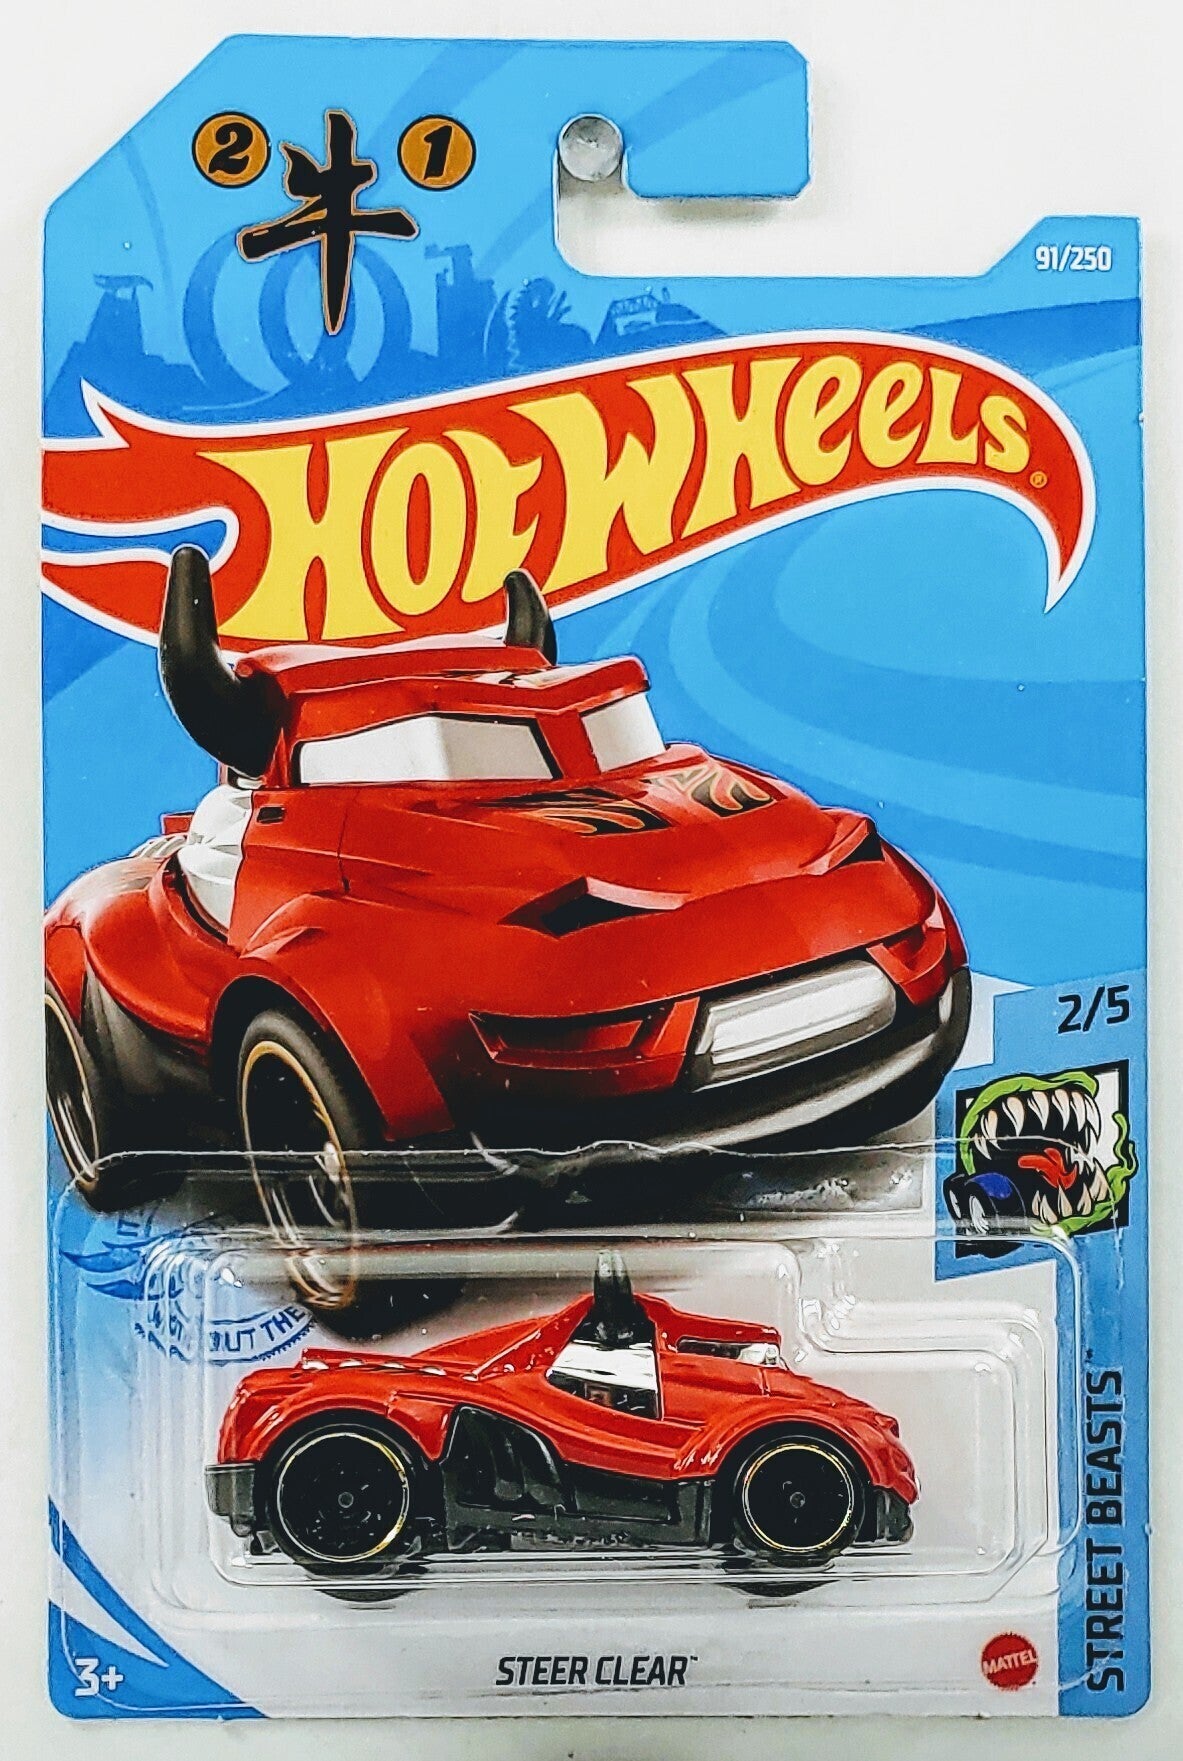 Hot Wheels 2021 - Collector # 091/250 - Street Beasts 2/5 - Steer Clear - Red - IC